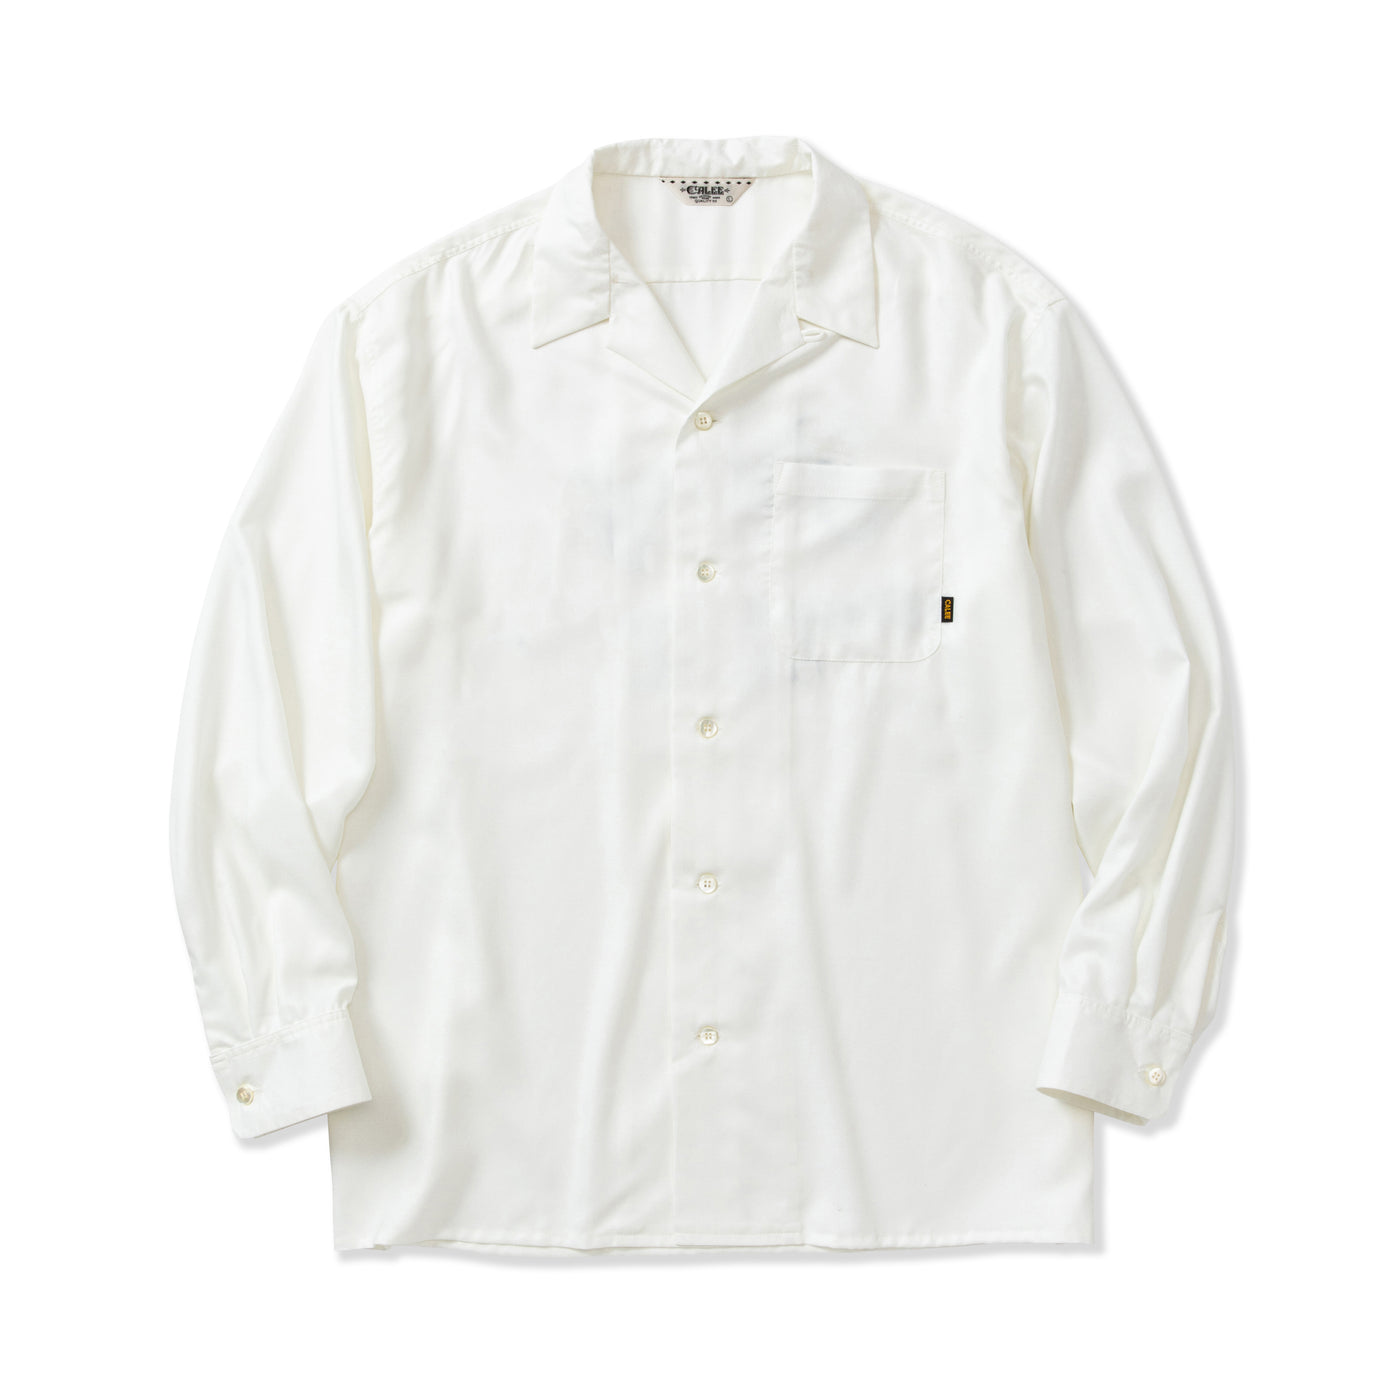 CALEE COUNTERSIGN EMBROIDERY AMUNZEN CLOTH L/S SHIRT